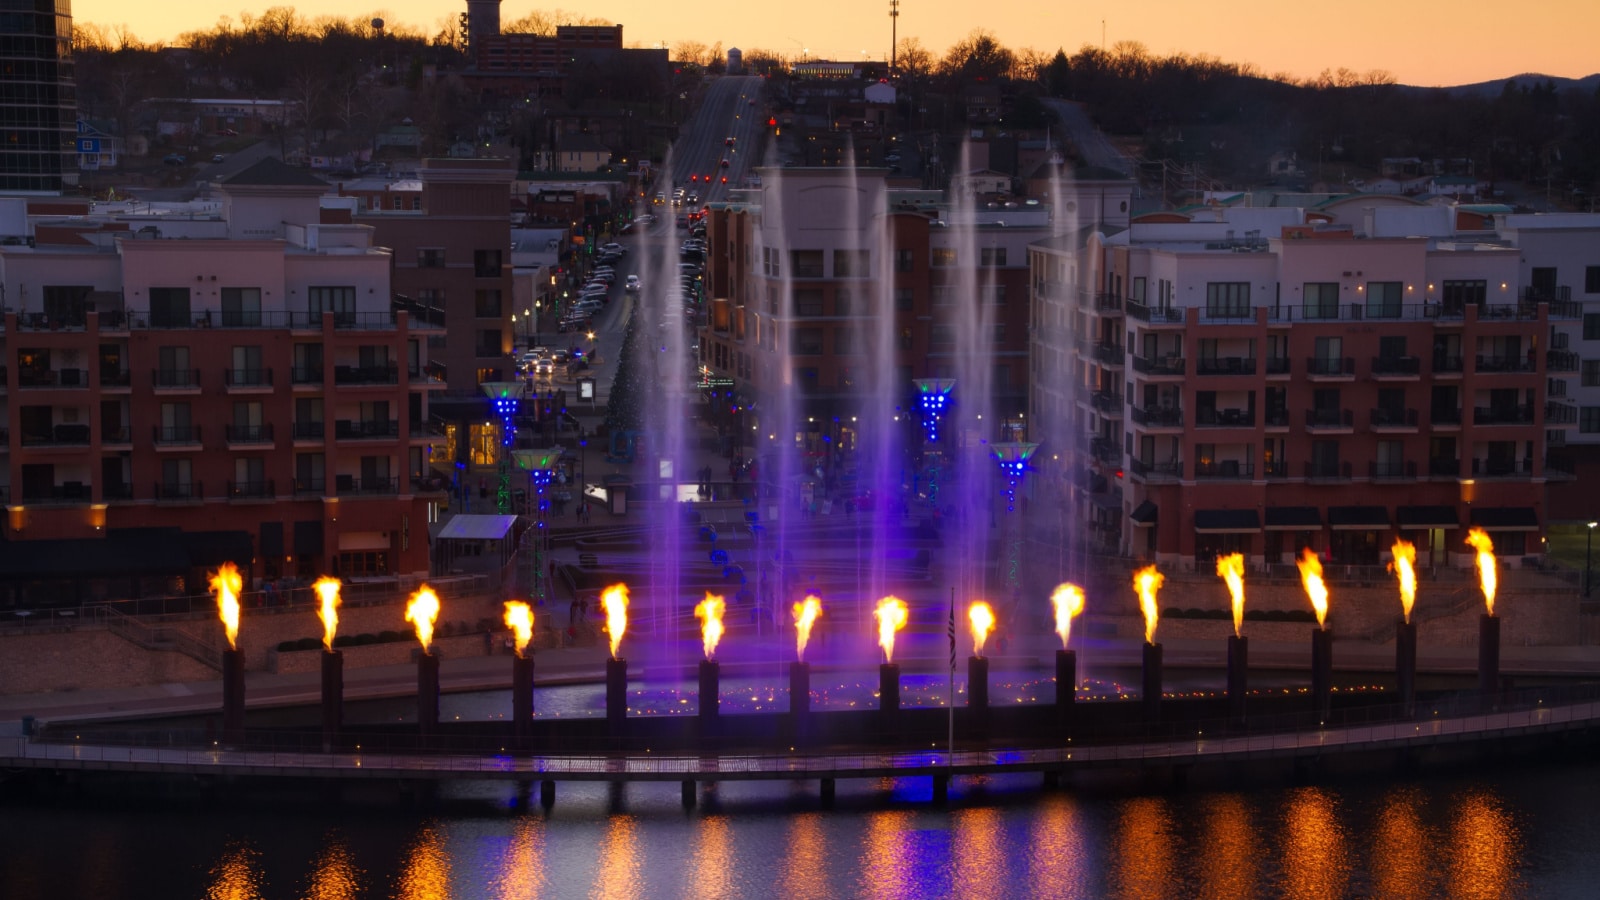 Skyline view of Branson, Missouri with the display showing at the landing waterfront park area. The fountain has fire reflection into the water with tourist watching as they shop.